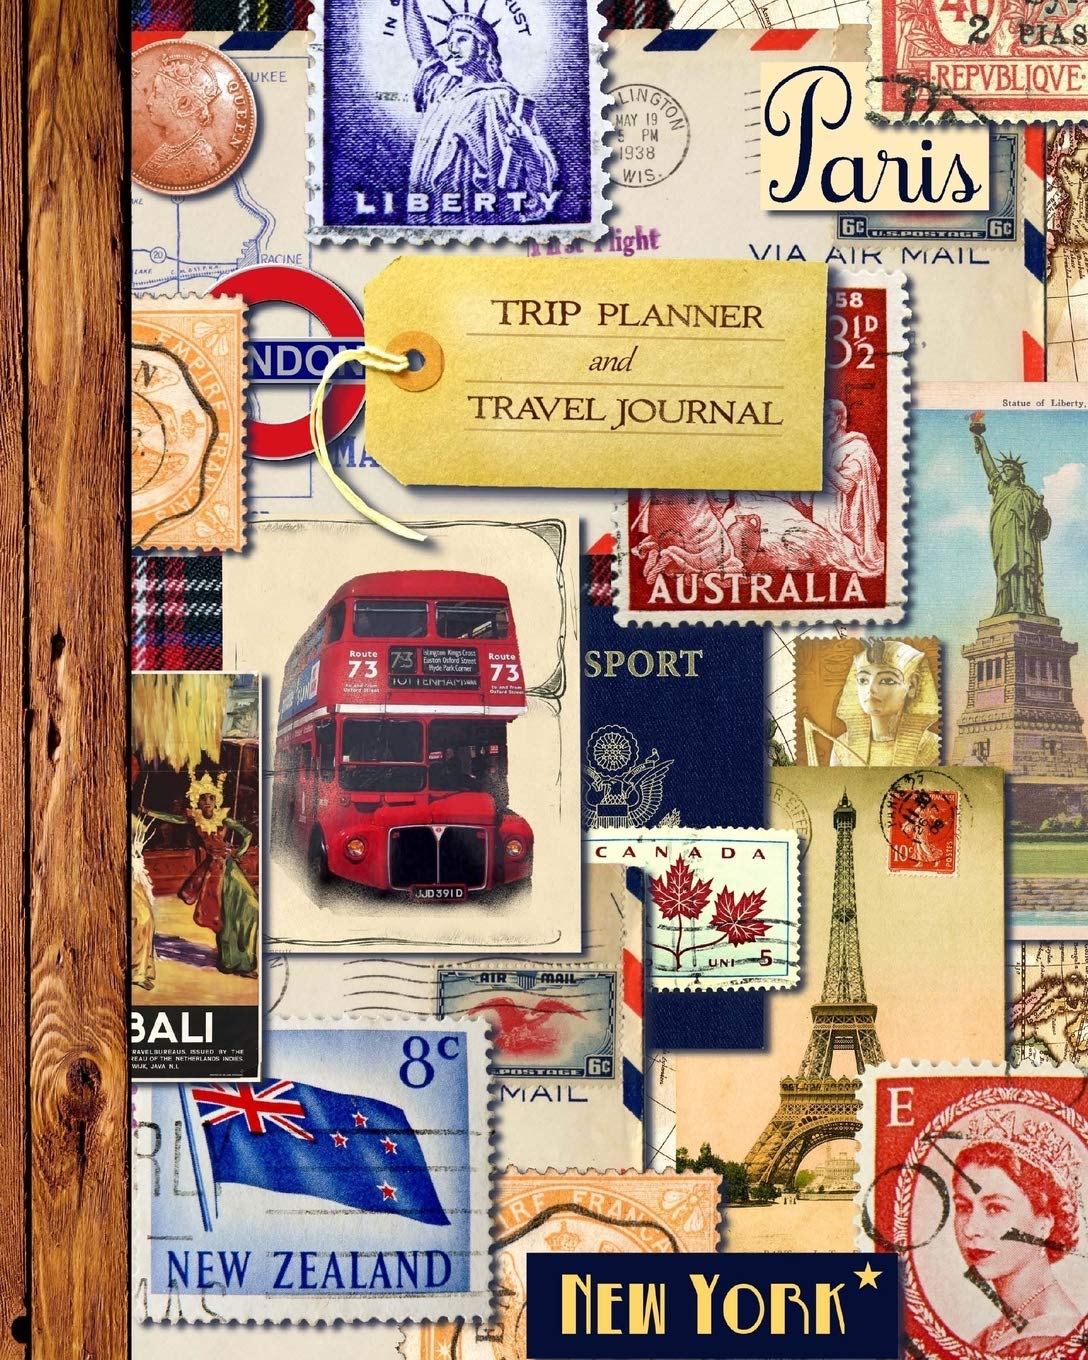 Trip Planner & Travel Journal: Vacation Planner & Diary for 4 Trips, with Checklists, Itinerary & more [ Softback Notebook * Large (8” x 10”) * Vintage Collage ] (Travel Gifts)